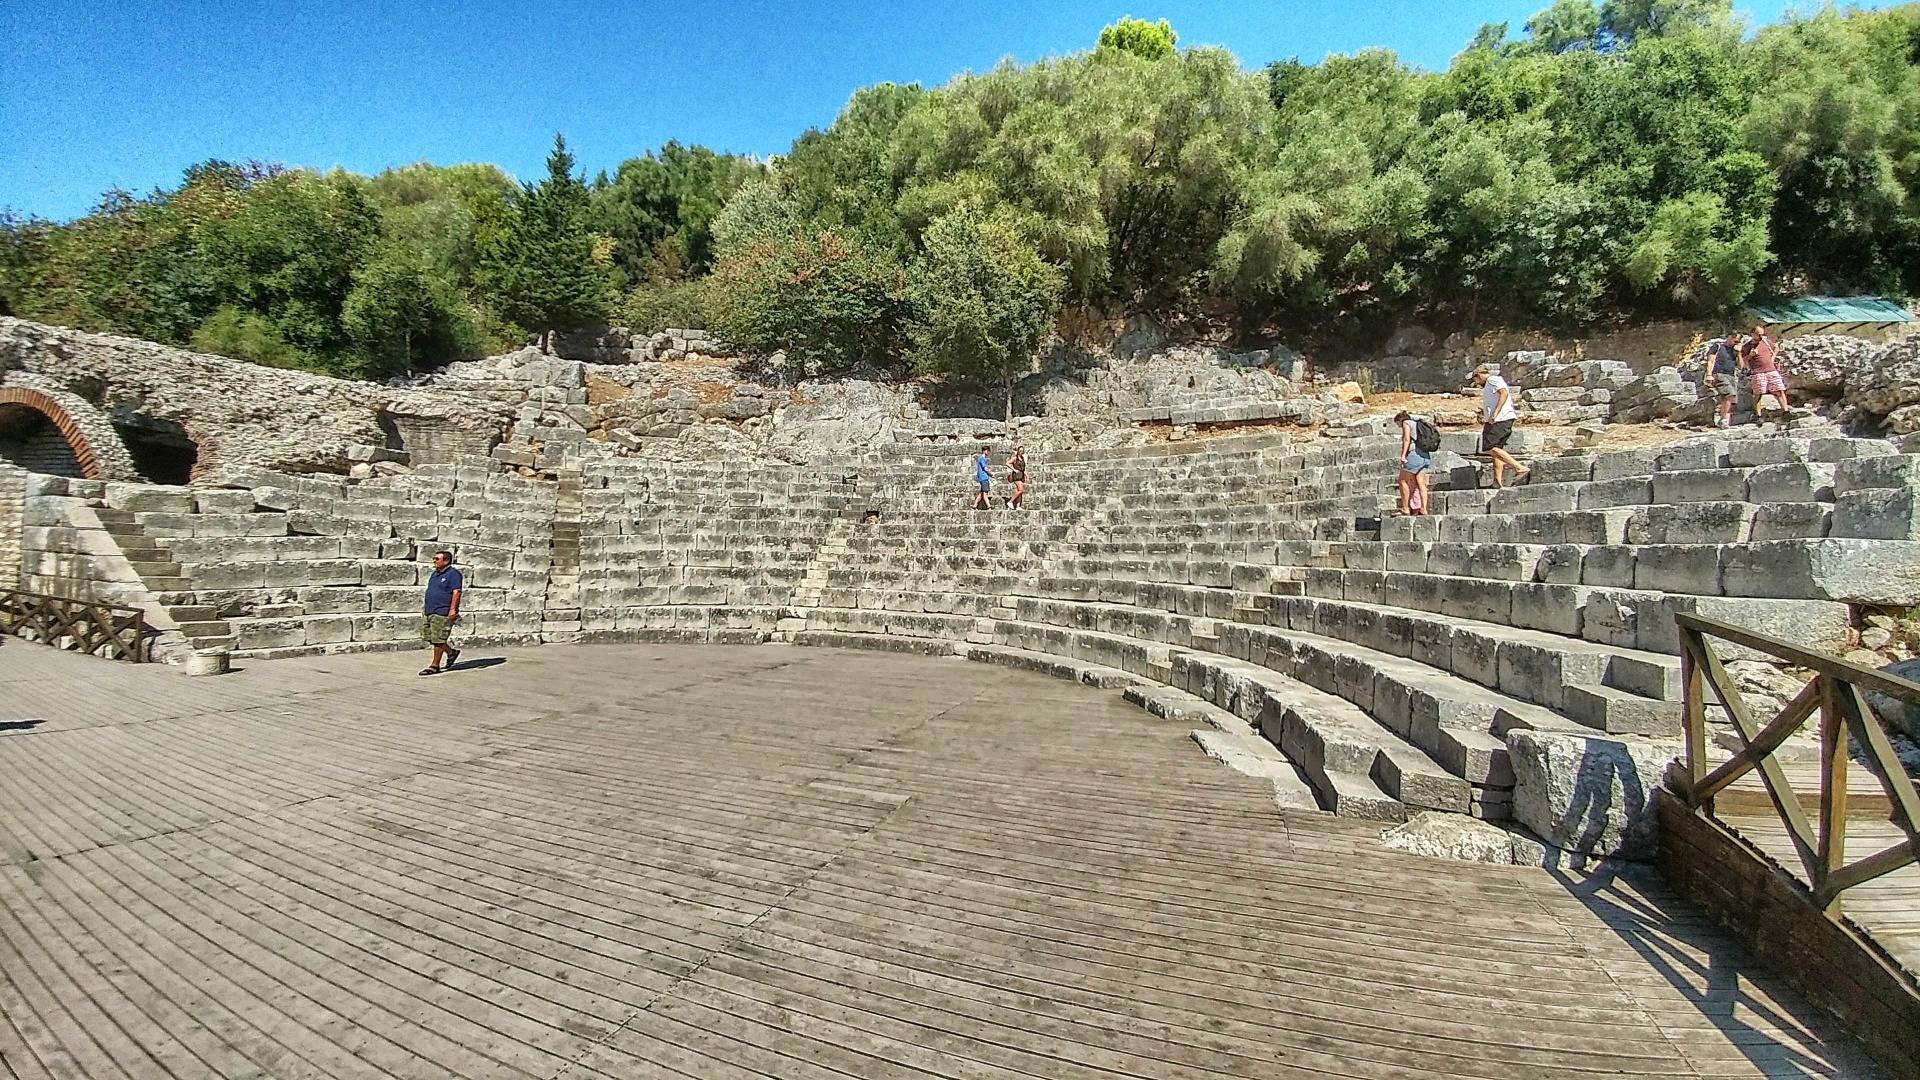 The huge amphitheater the romans left in Butrint